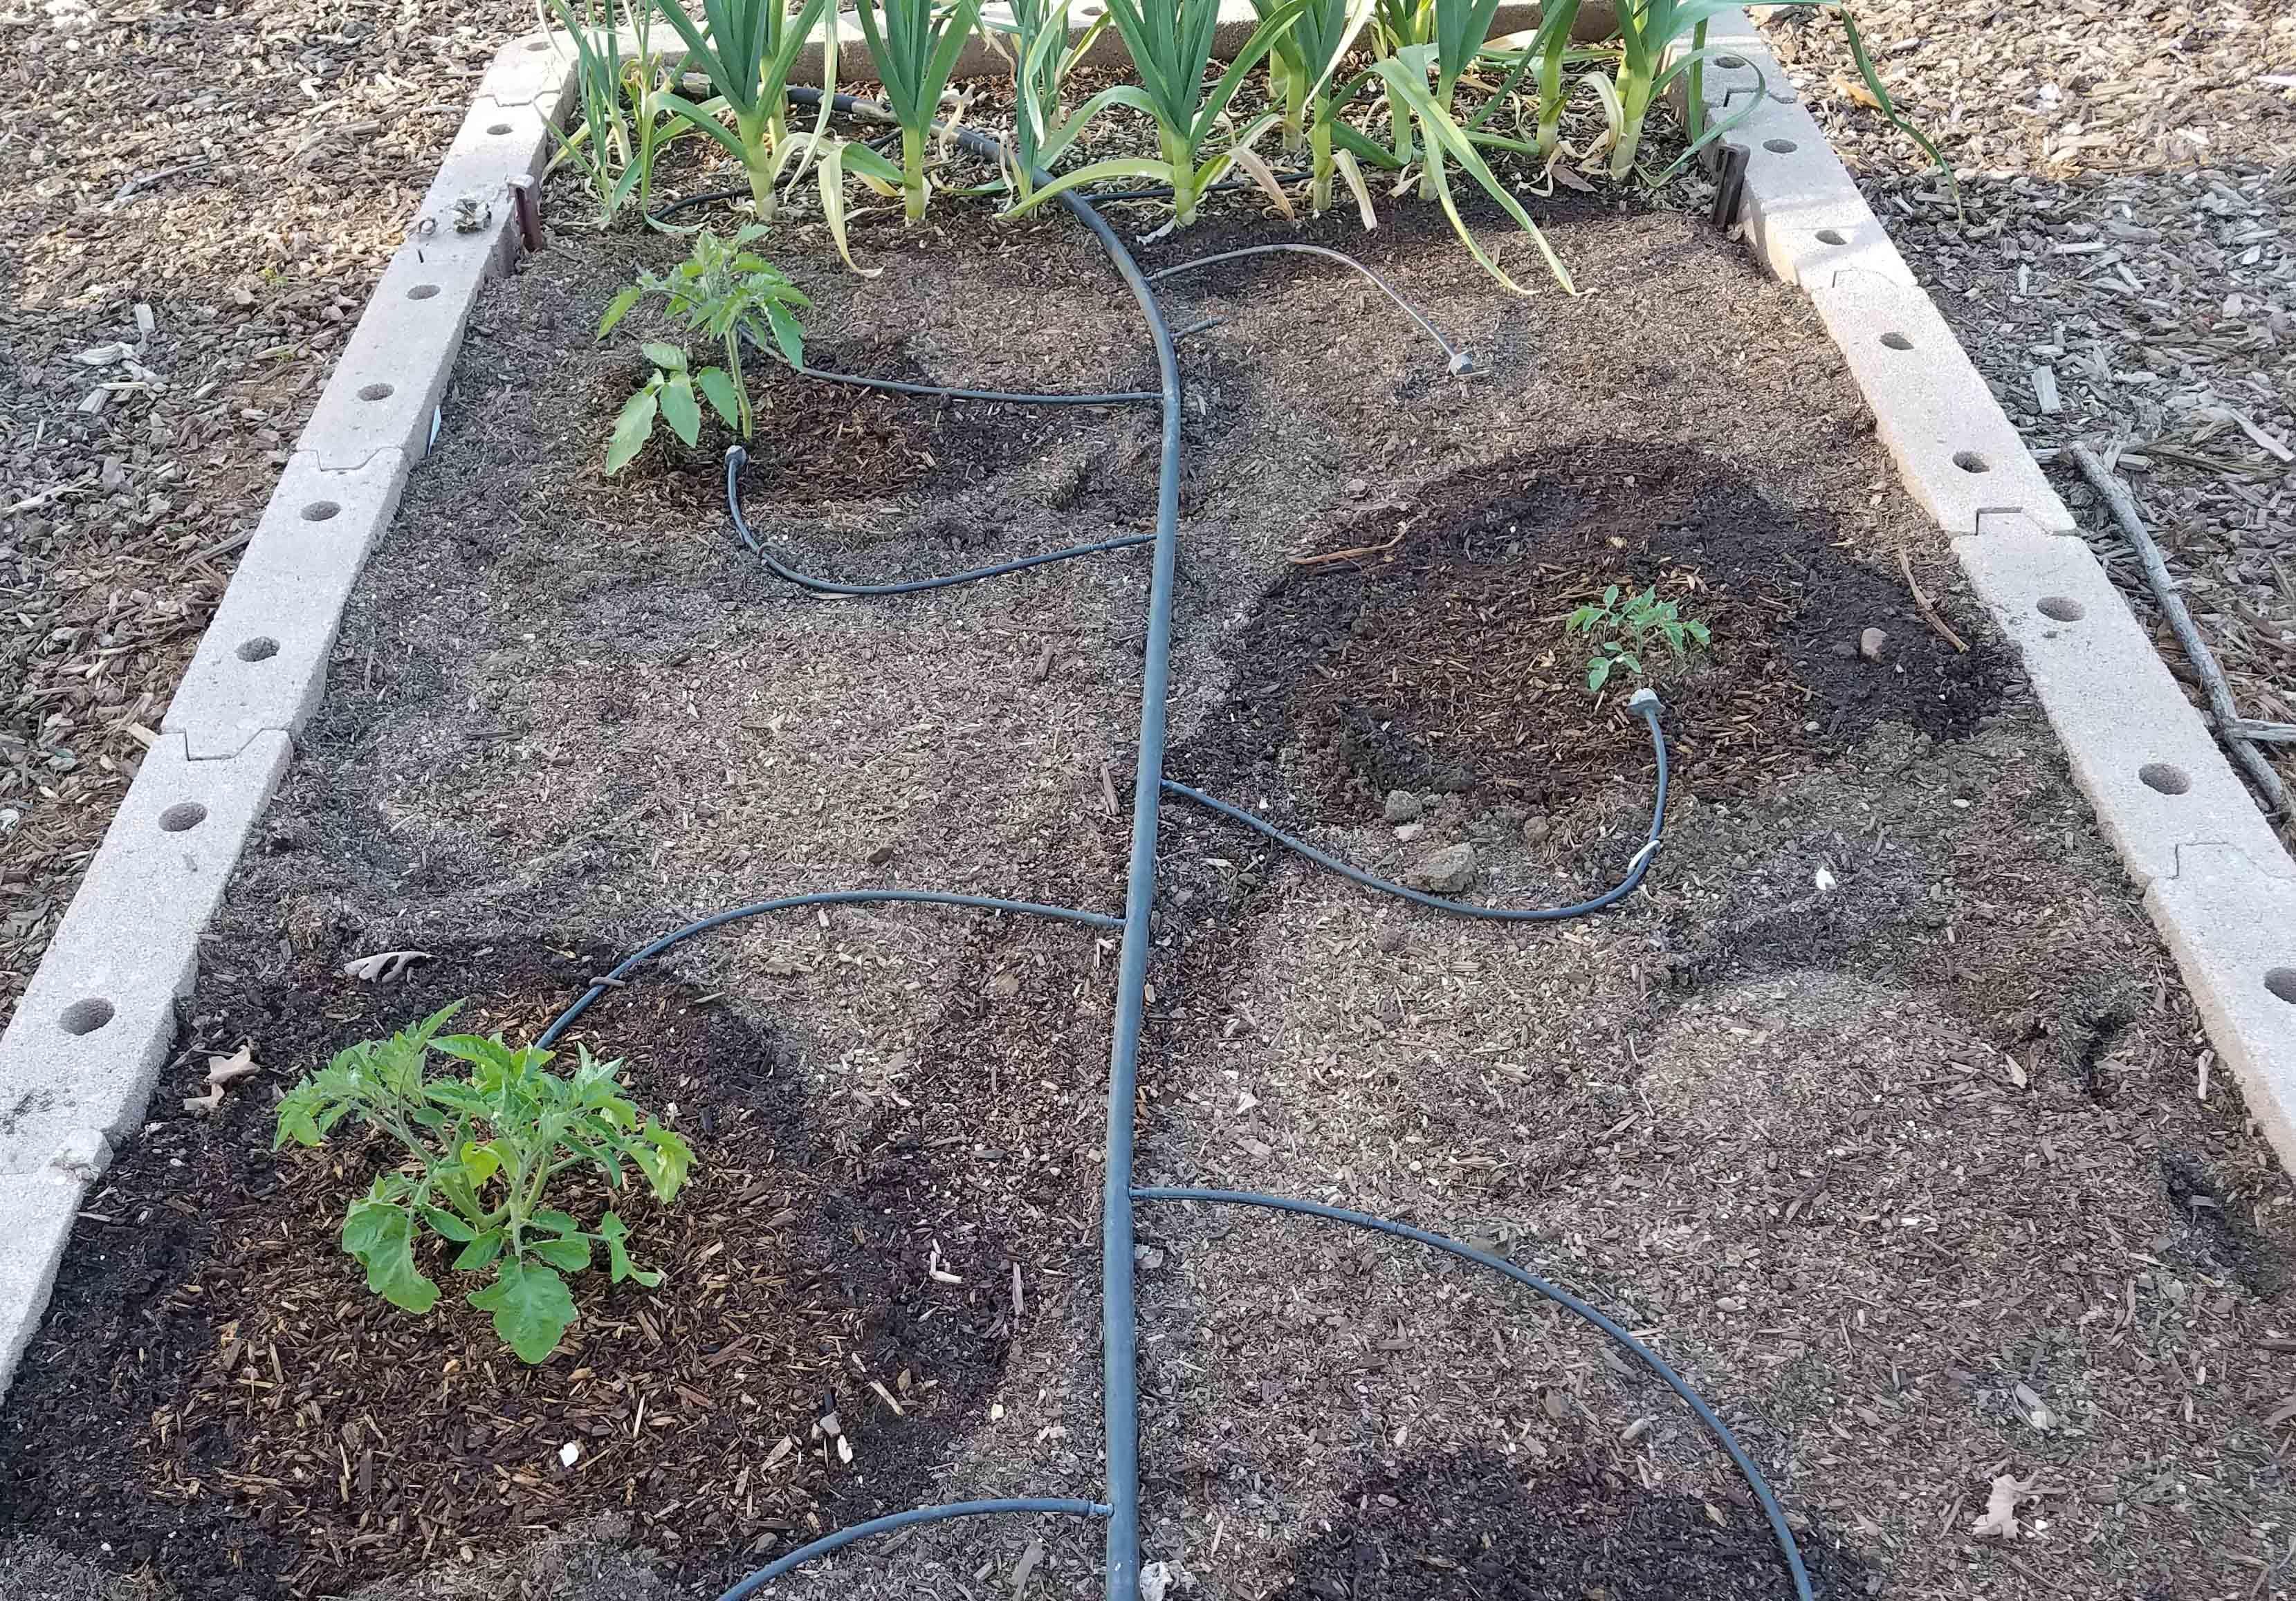 Drip irrigation offers several advantages, water is slowly placed more accurately in the root zone so there is little or no waste. Photo credit: Butte